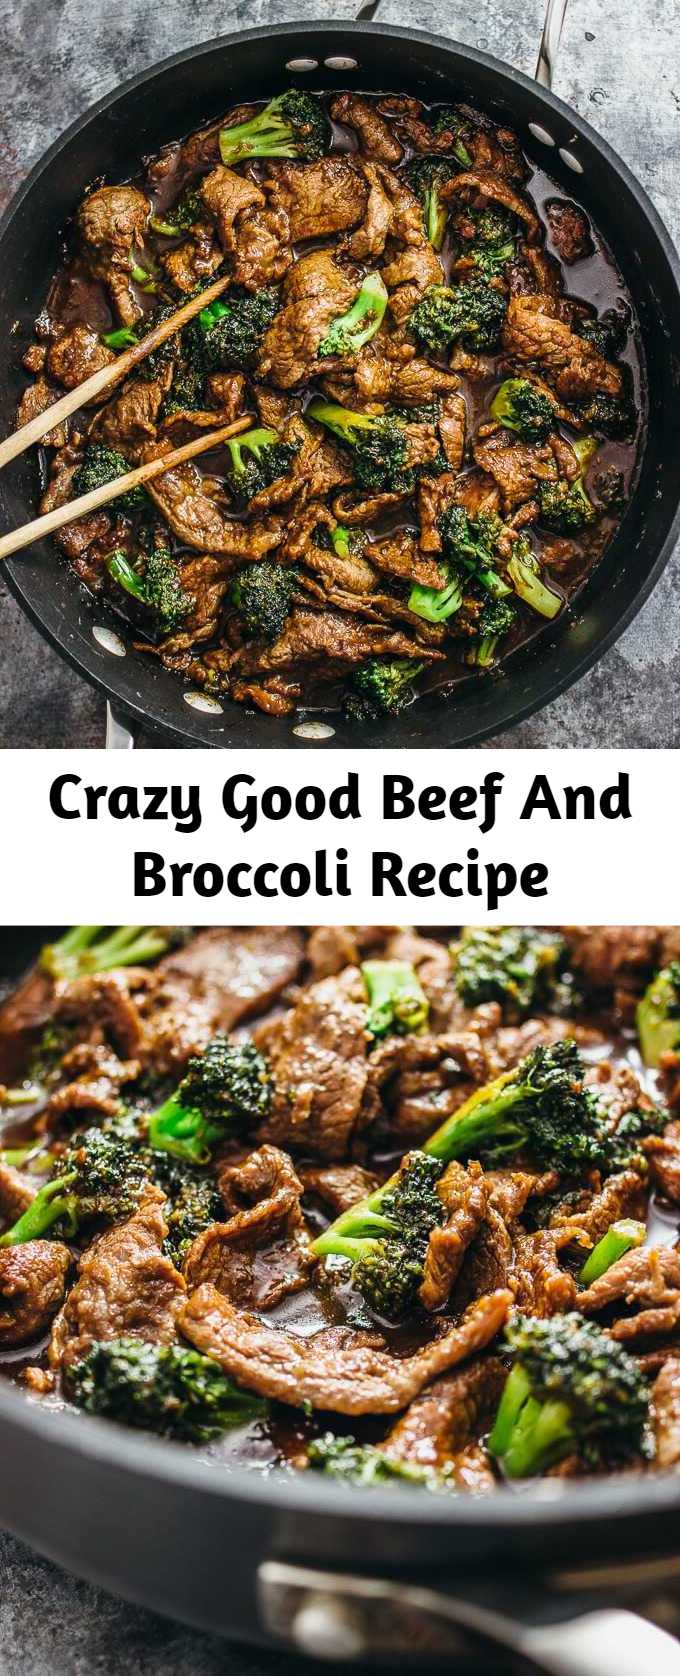 Crazy Good Beef And Broccoli Recipe - An easy recipe for authentic Chinese beef and broccoli. I love beef and broccoli because I can’t resist anything with tender and tasty strips of flank steak, and it’s such an easy one-pan stir fry recipe that takes less than 30 minutes total. Also, if you’re a huge broccoli fan like me, you’ll love these juicy and flavorful bites of broccoli in between mouthfuls of meat and rice.